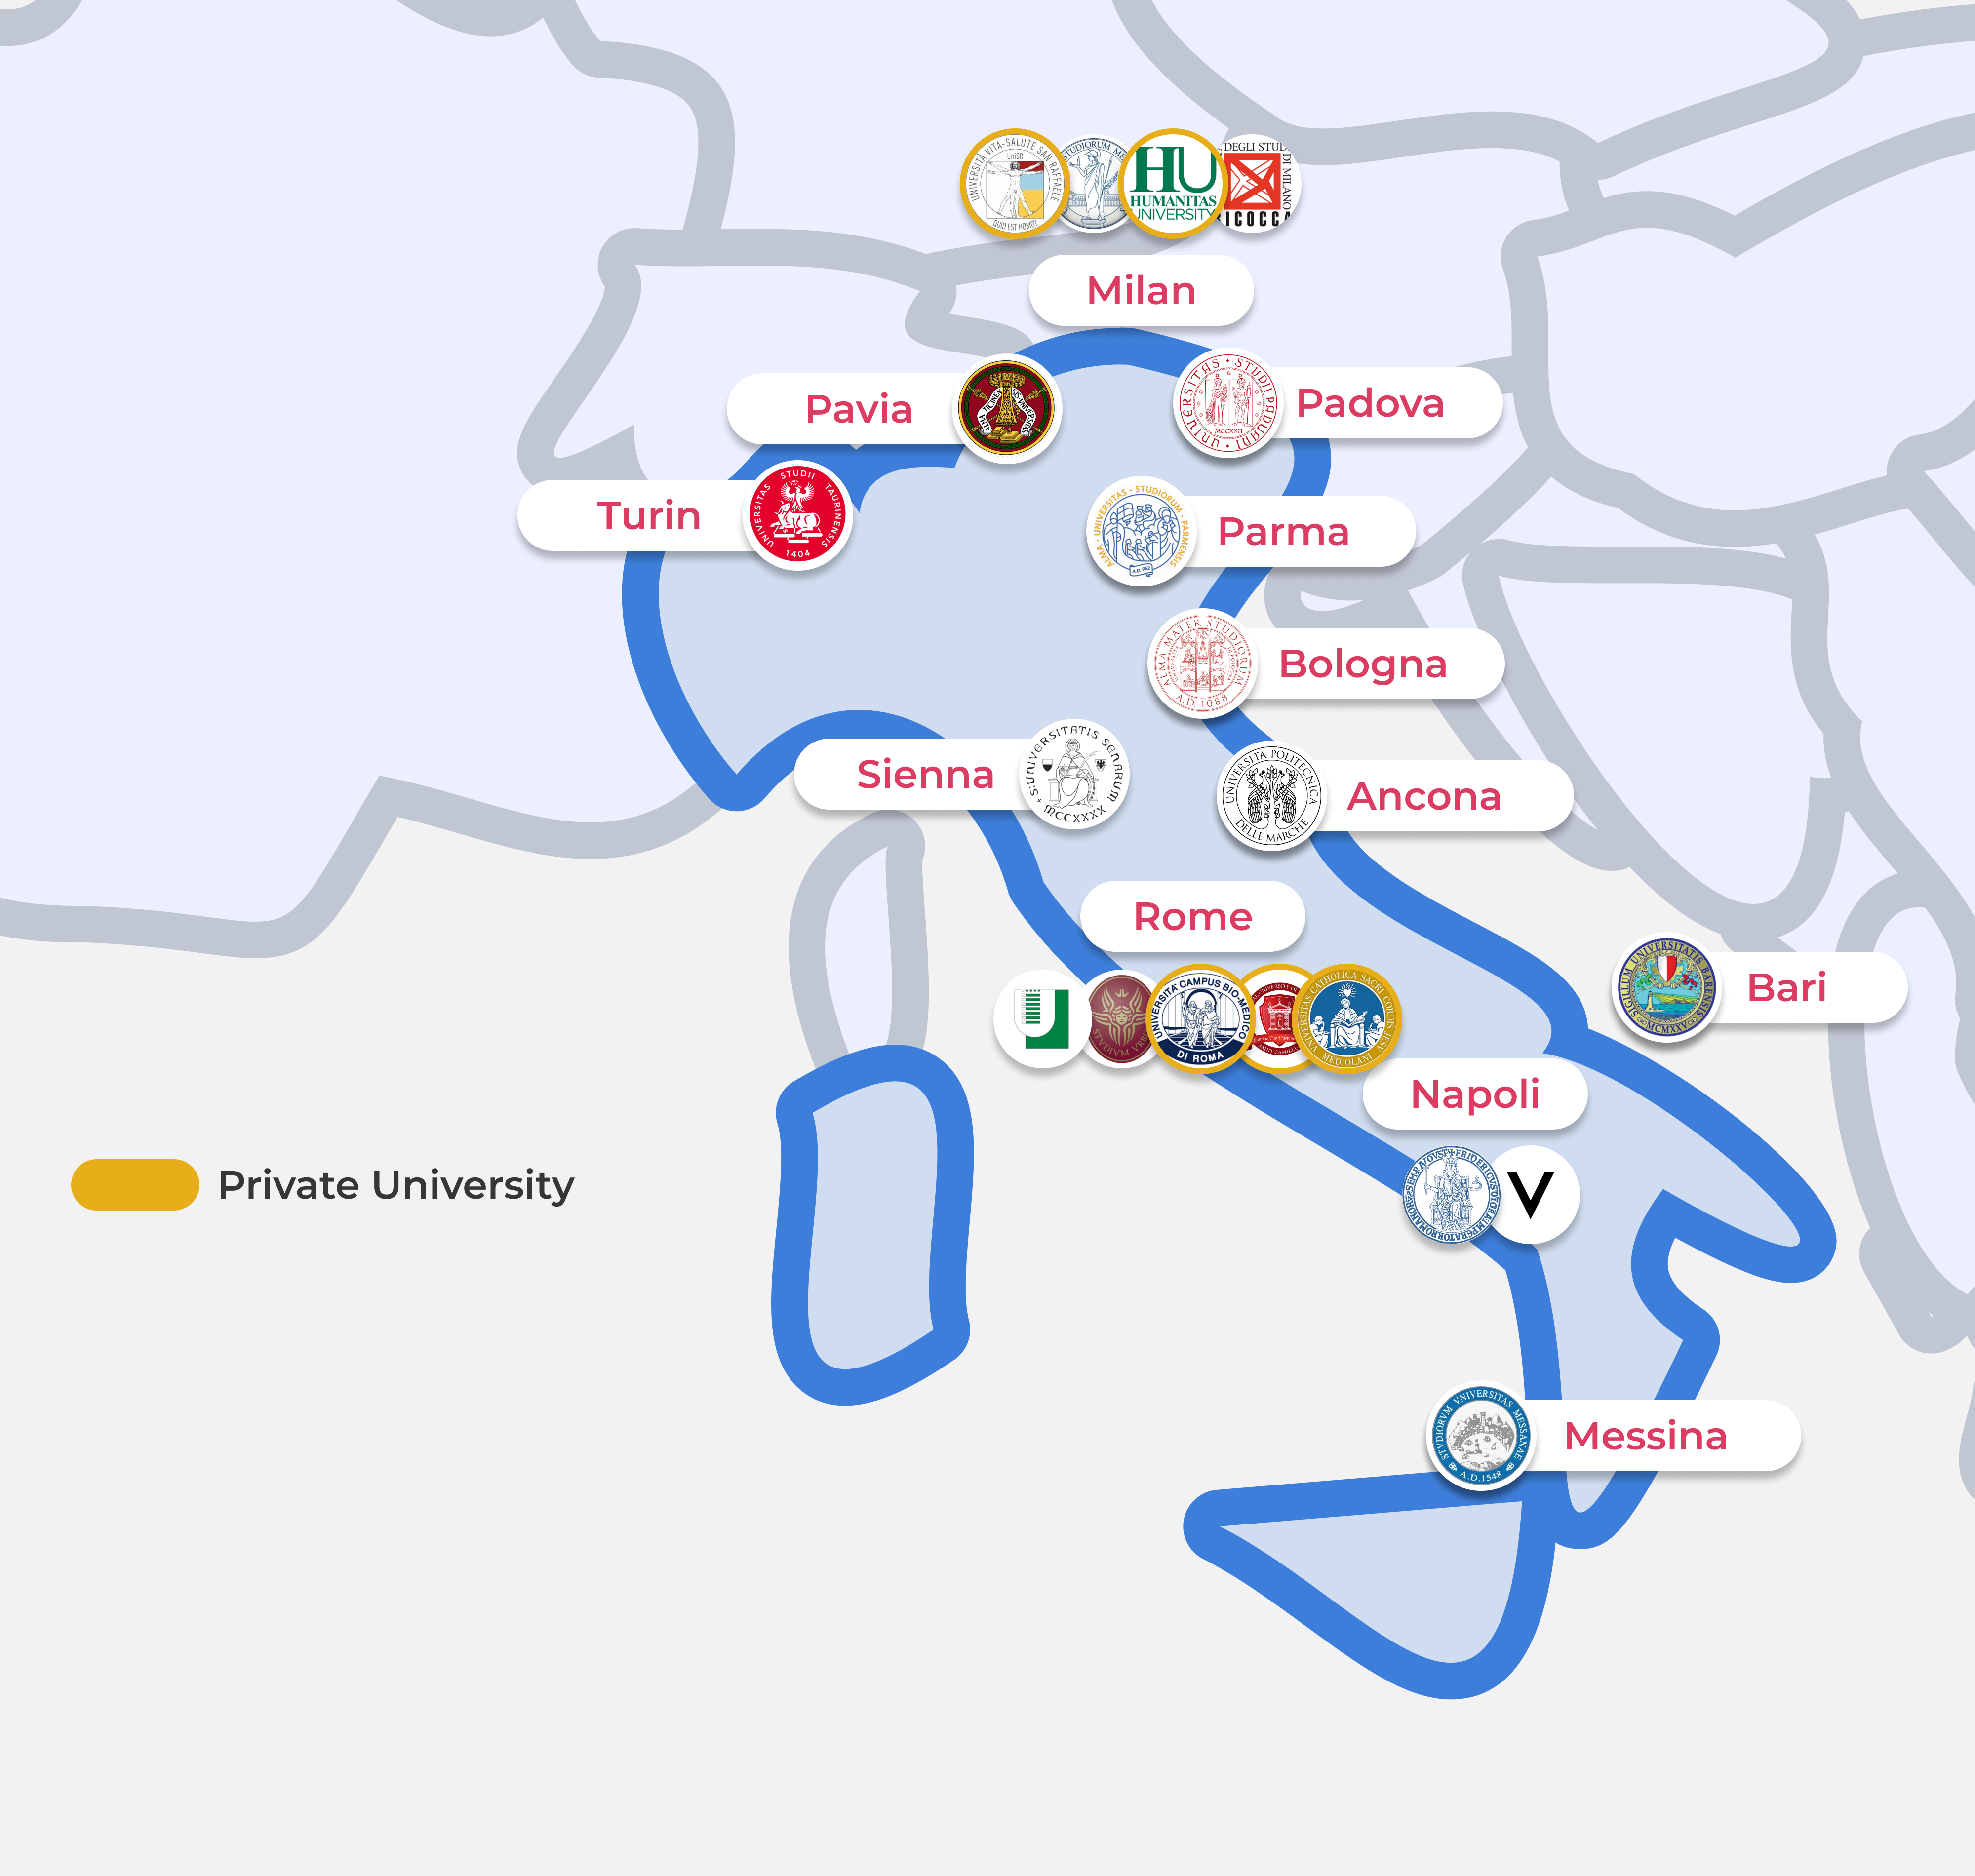 The different locations of the medical universities across italy